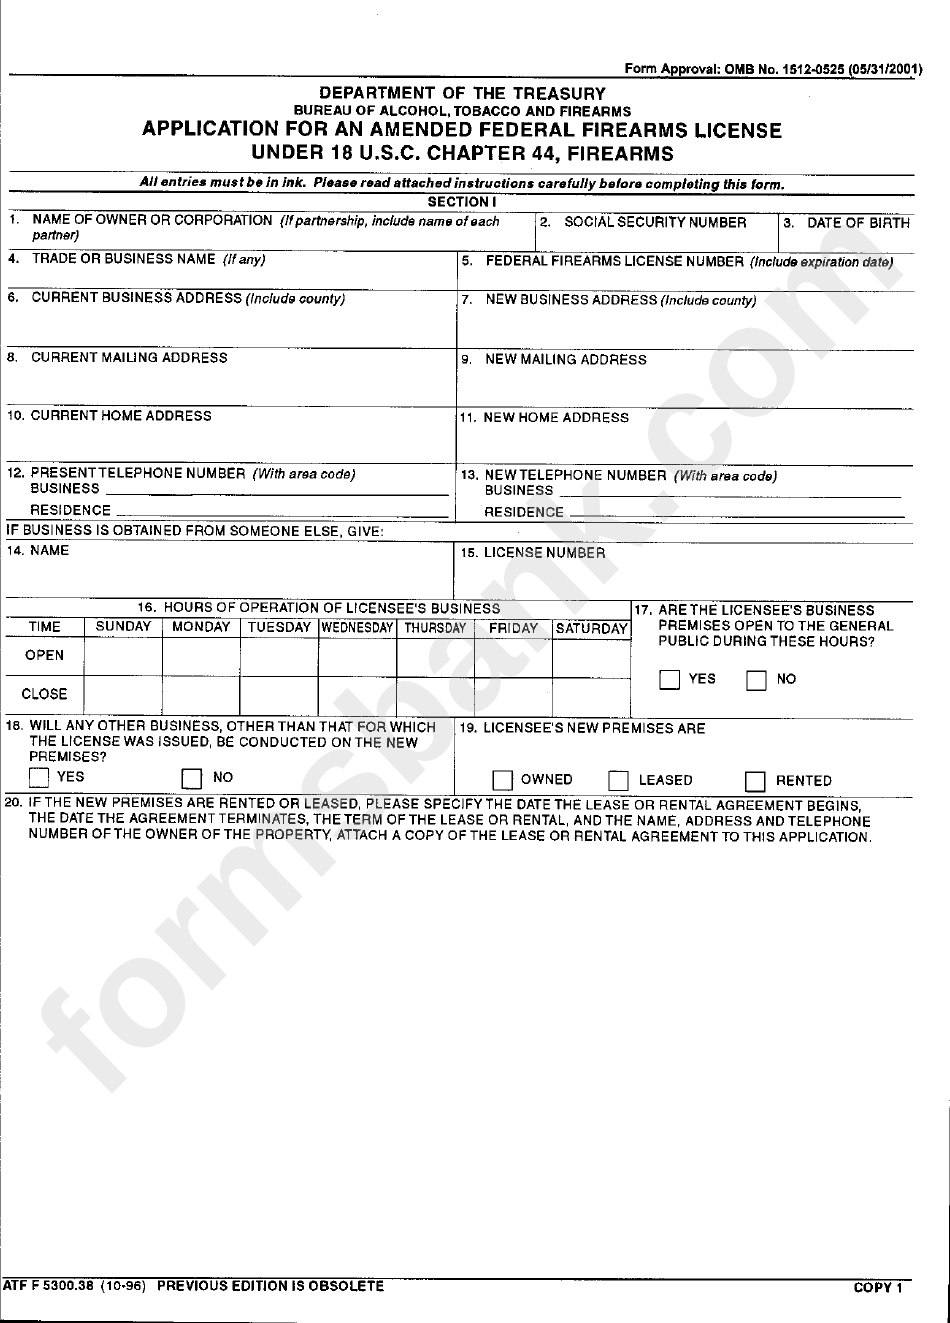 Form 1512-0525 - Application For An Amended Federal Firearms License Under 18 U.s.c. Chapter 44, Firearms